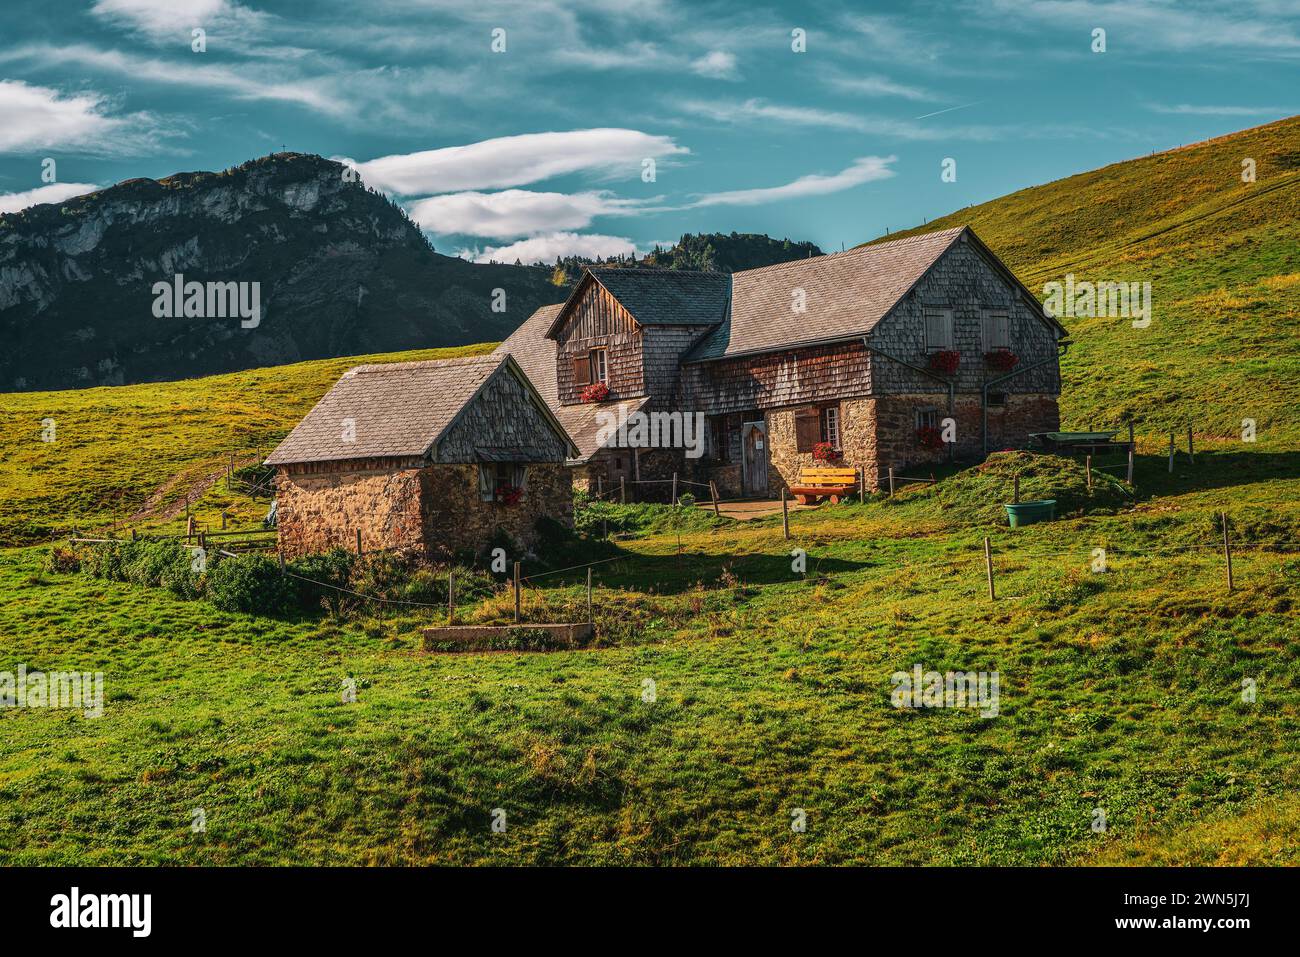 Farm in the Swiss mountains on Lake Lucerne. Stock Photo